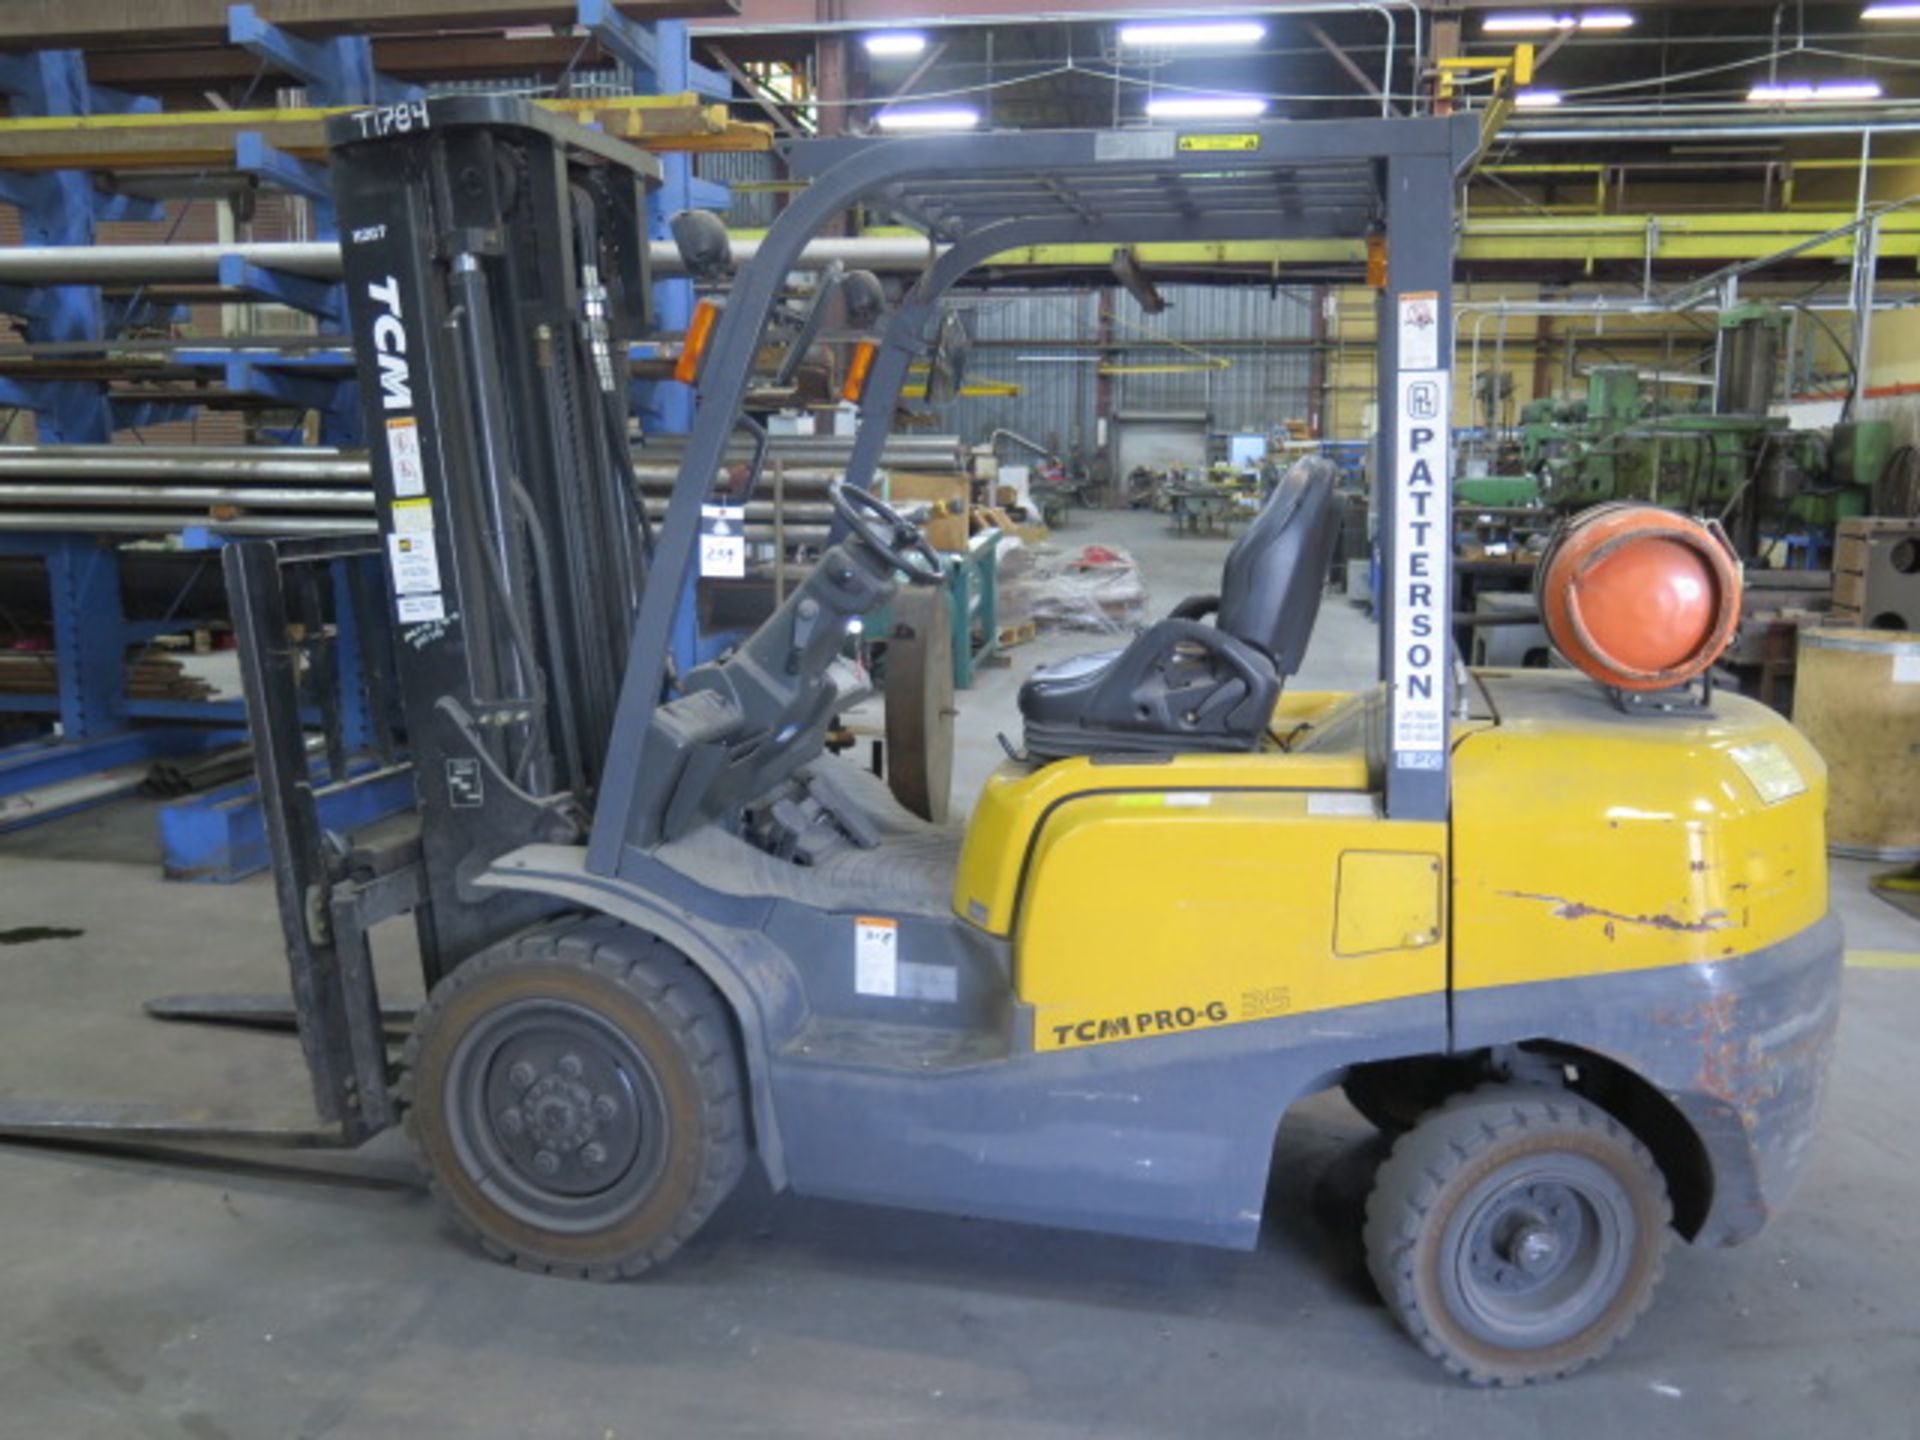 TCM PRO-G-25 6300 Lb Cap LPG Forklift s/n VFHM480-2Y5 / 100E-SSS-B08 w/ 3-Stage Mast, SOLD AS IS